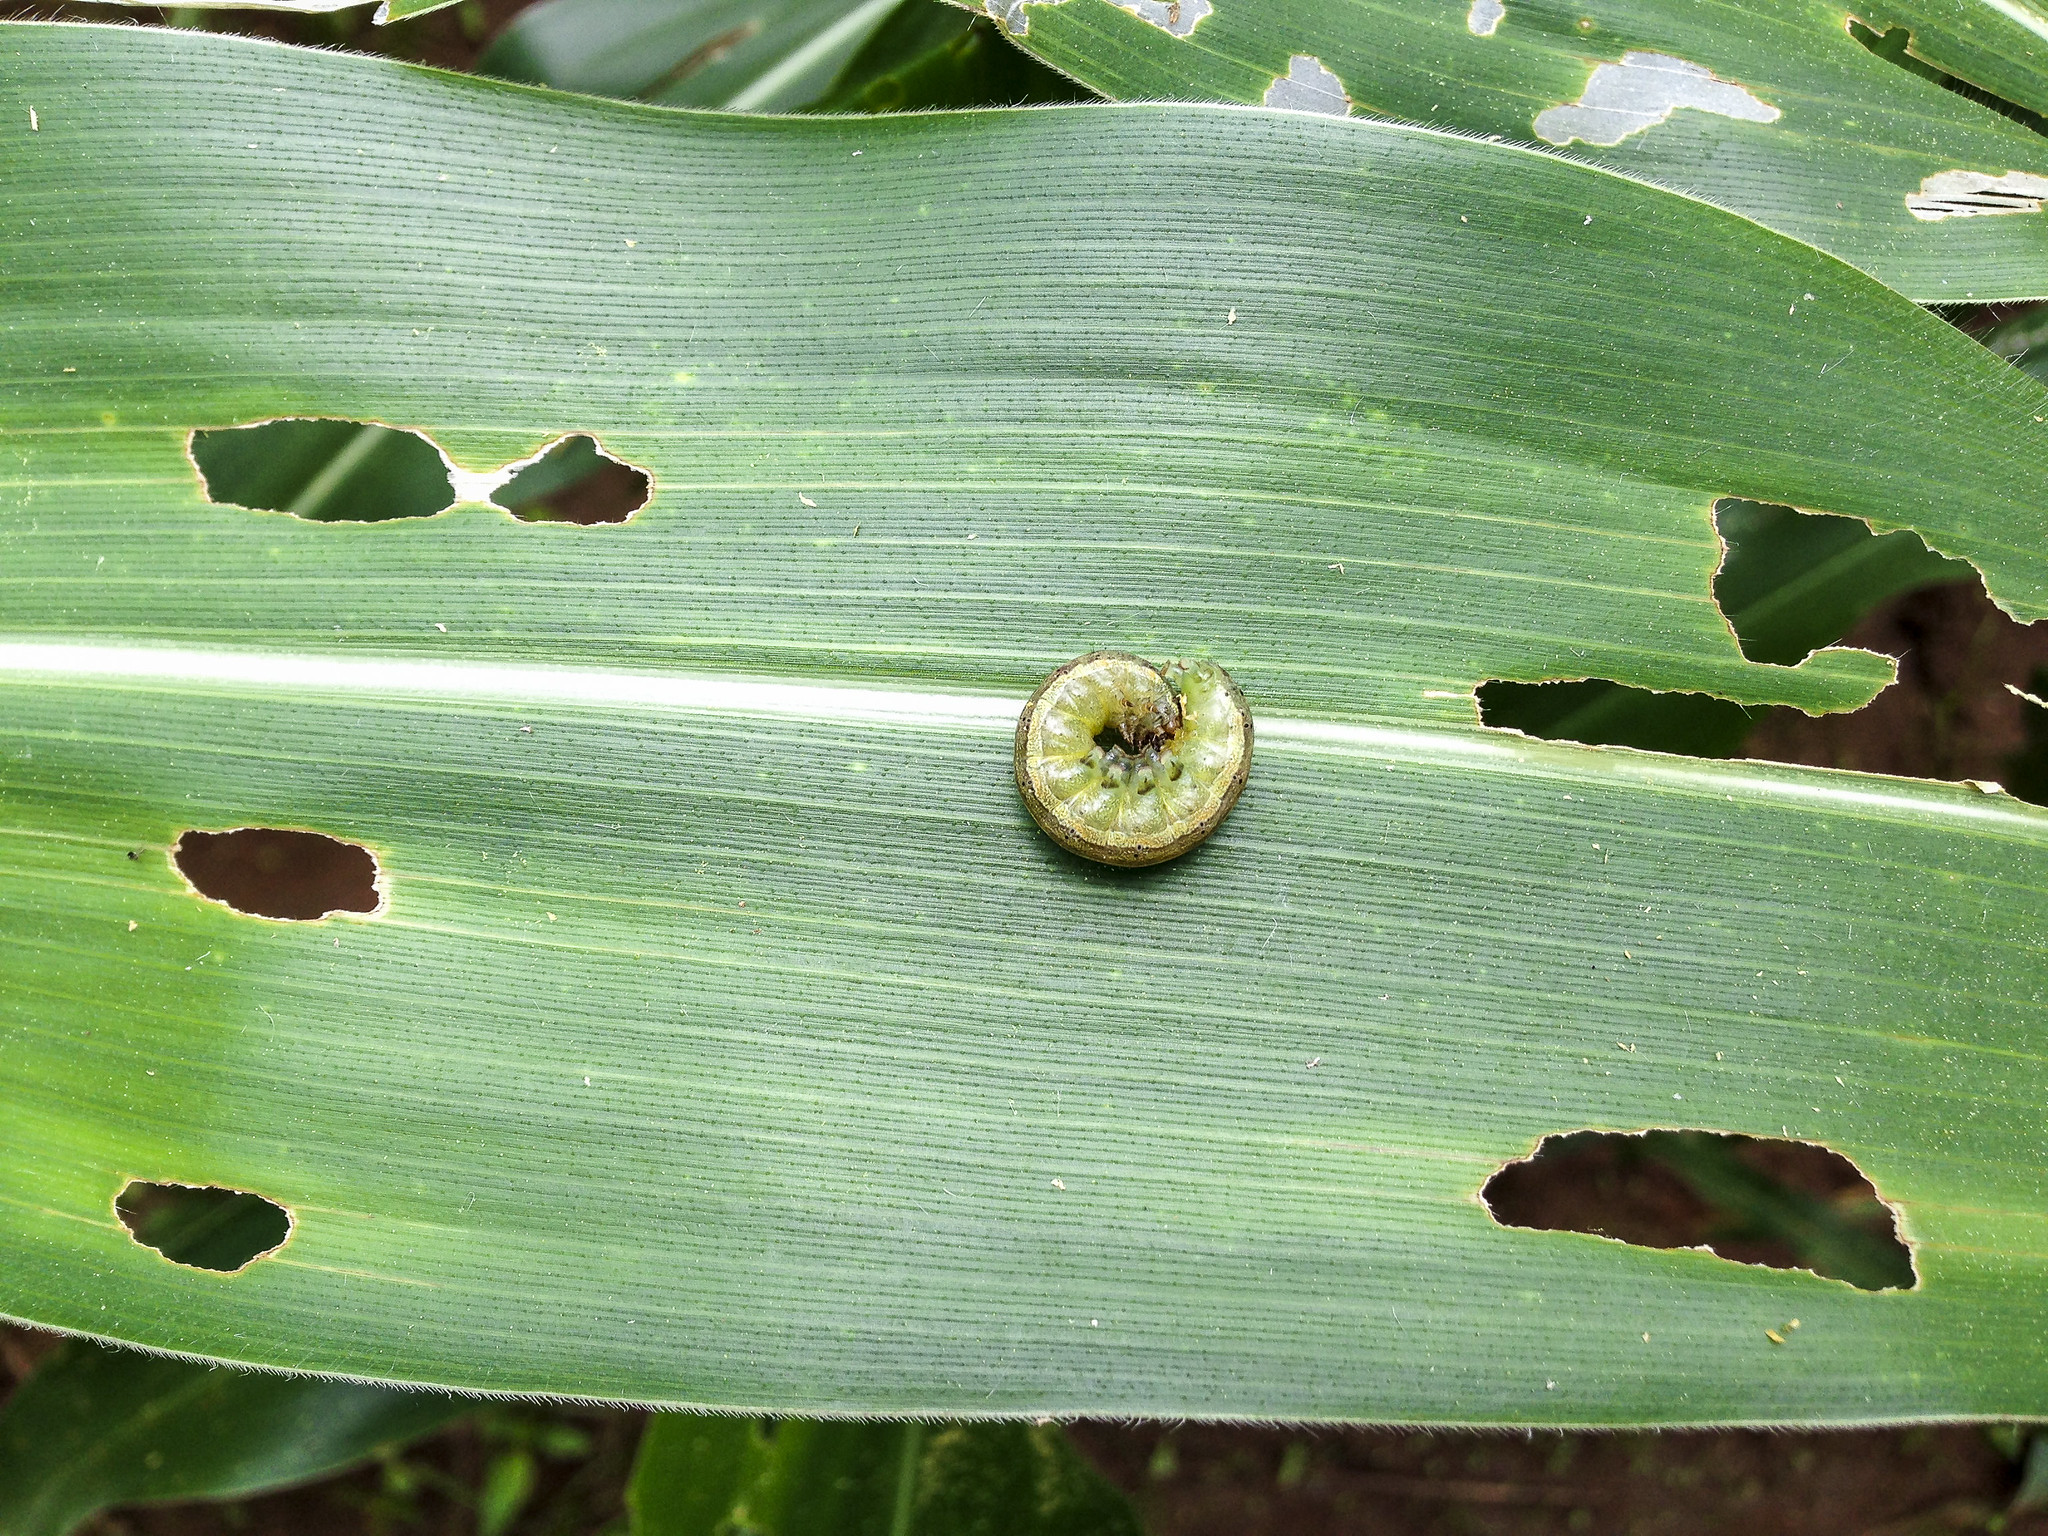 Foliar damage to maize leaves due to adult fall armyworm in Zimbabwe. (Photo: C. Thierfelder/CIMMYT)